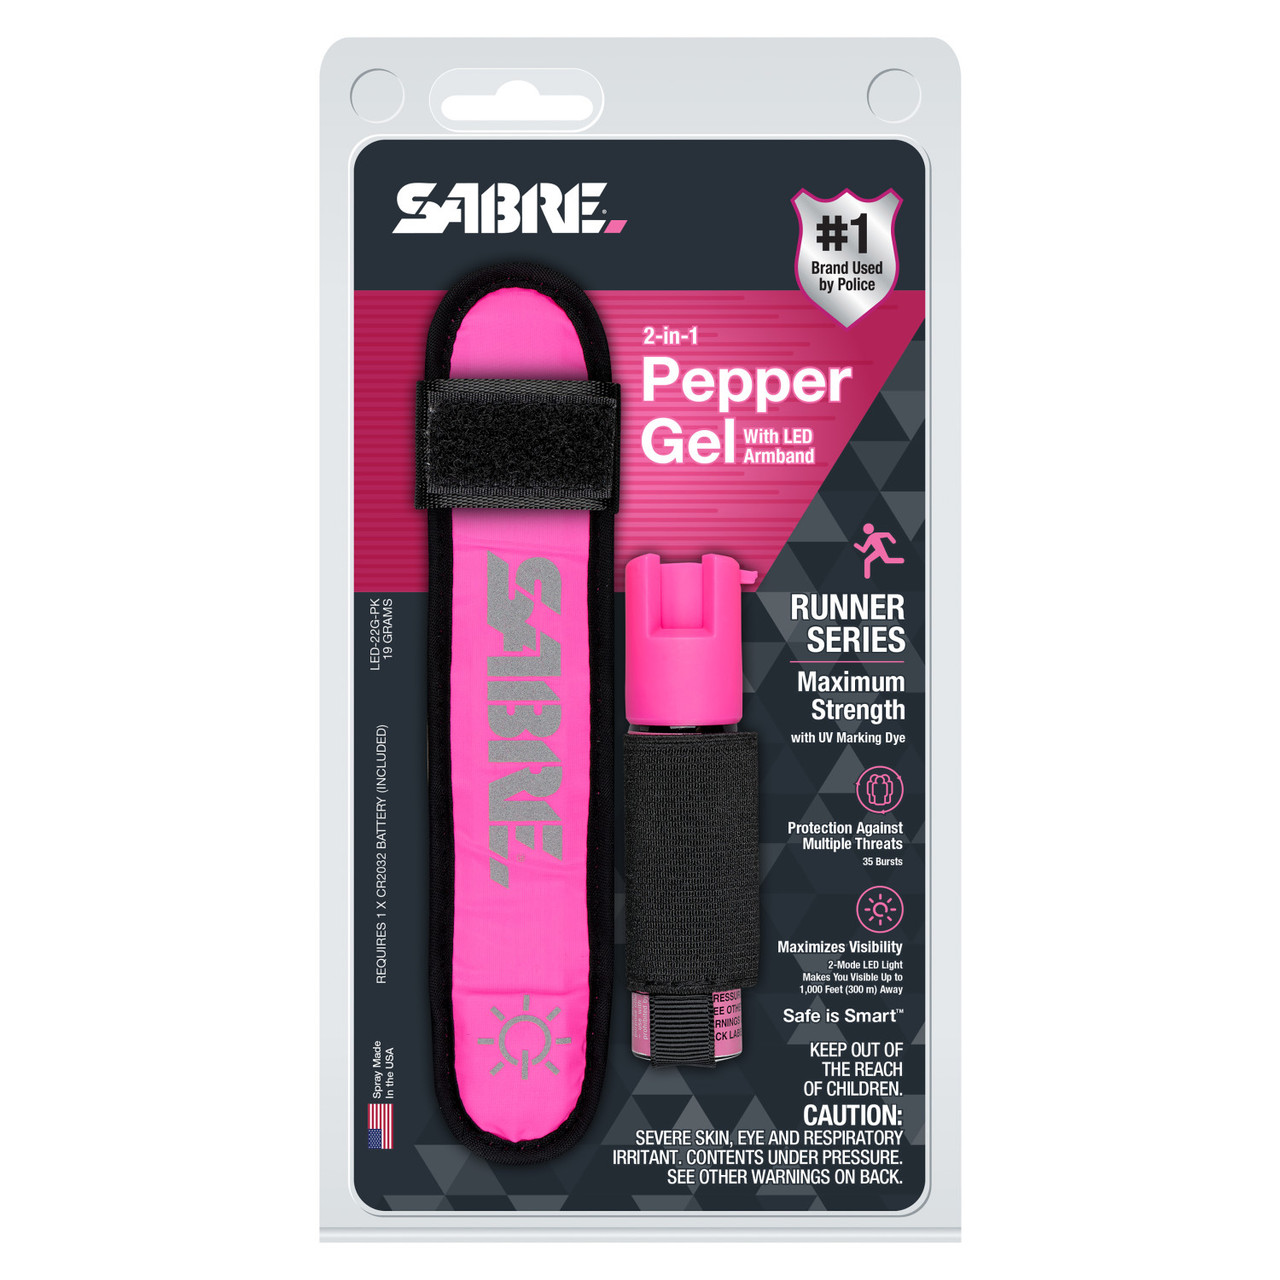 Pepper Spray And Led Arm Band